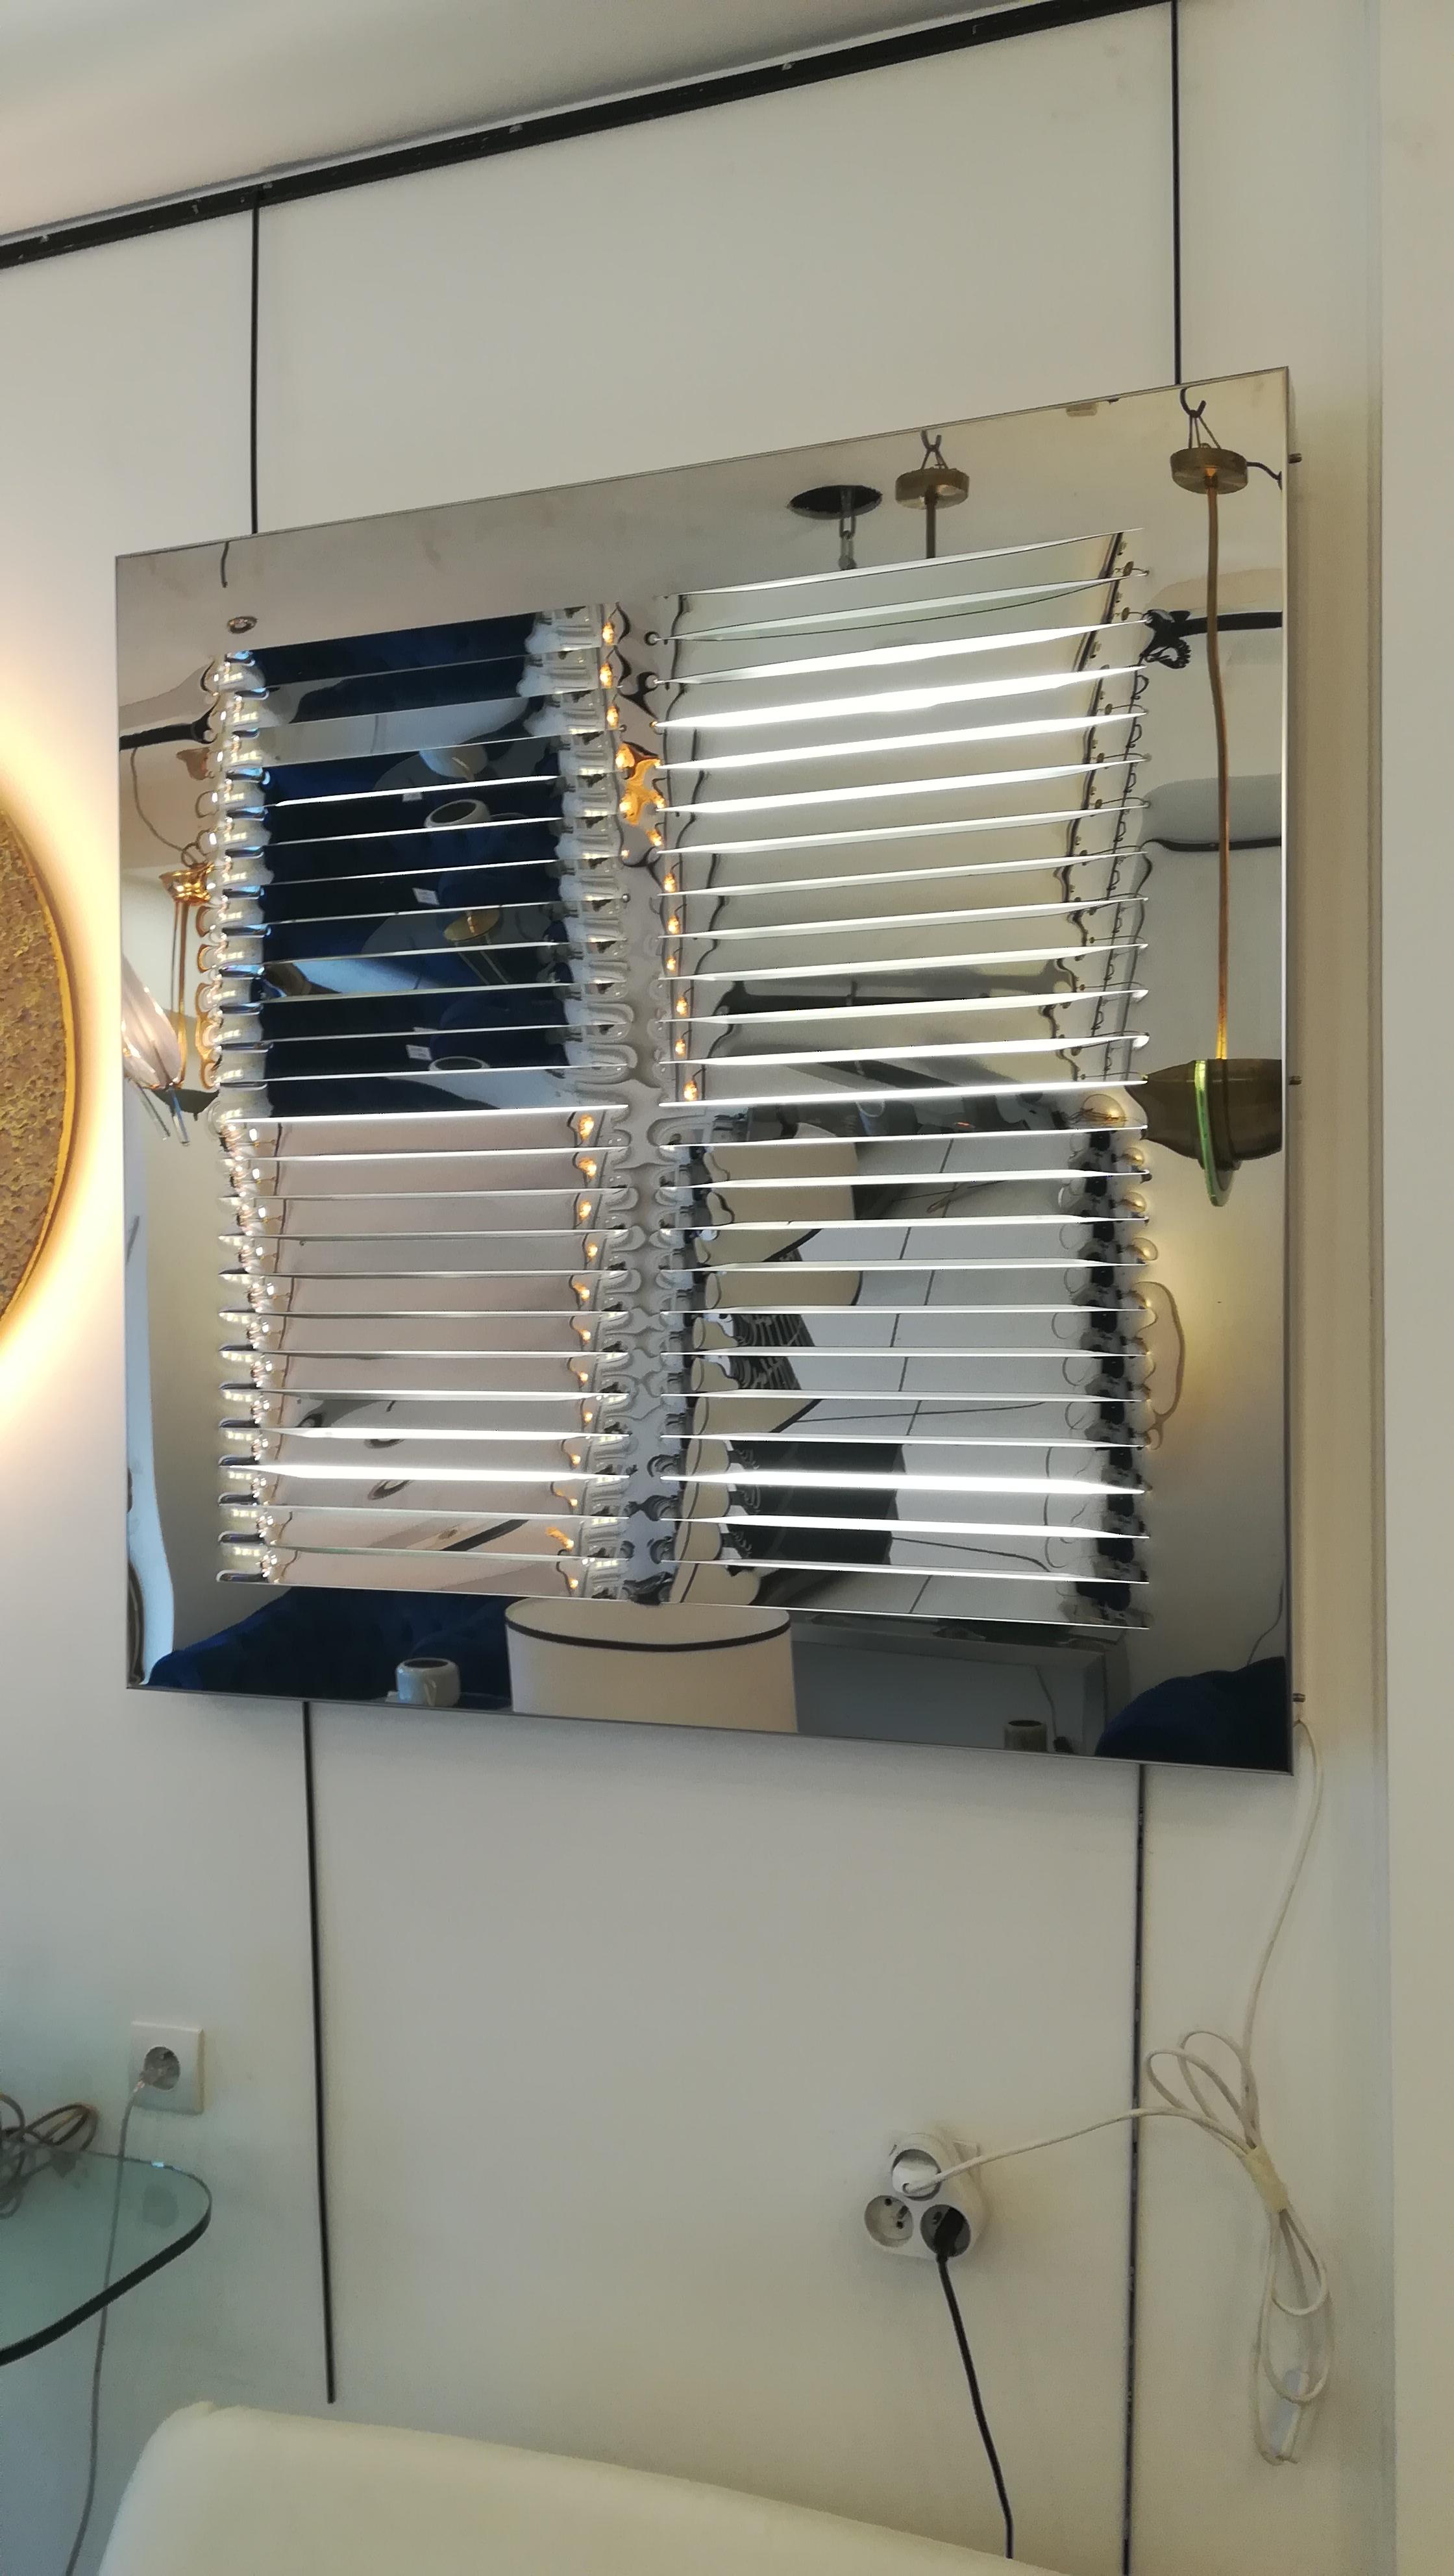 Stainless steel kinetic sconce with 3 white neons lights.
Horizontal cuts.